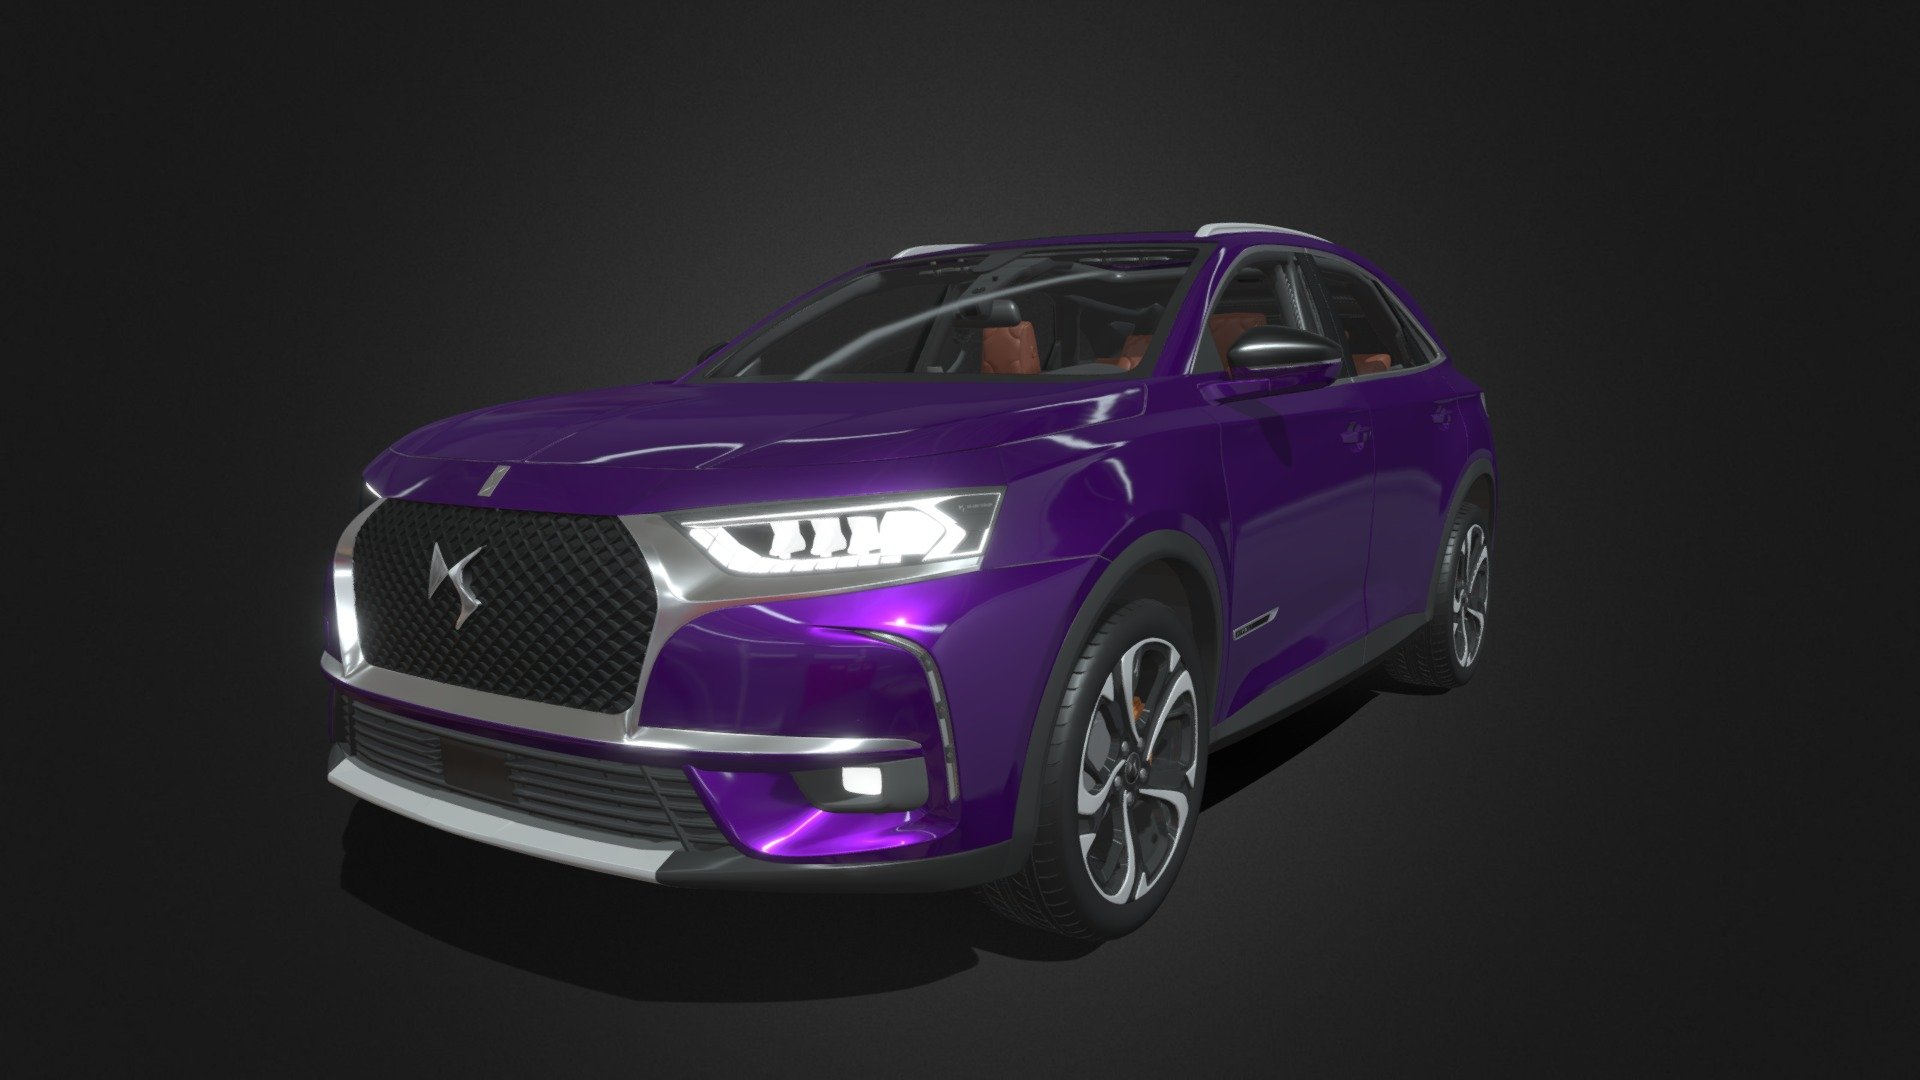 The DS7 Crossback is a compact luxury crossover SUV from the French automaker DS Automobiles. The vehicle was presented for the first time on 28 February 2017, and its public premiere was at the 87th Geneva Motor Show in March 2017 - DS 7 Crossback 2018 - 3D model by Davidson (@a0930582398) 3d model